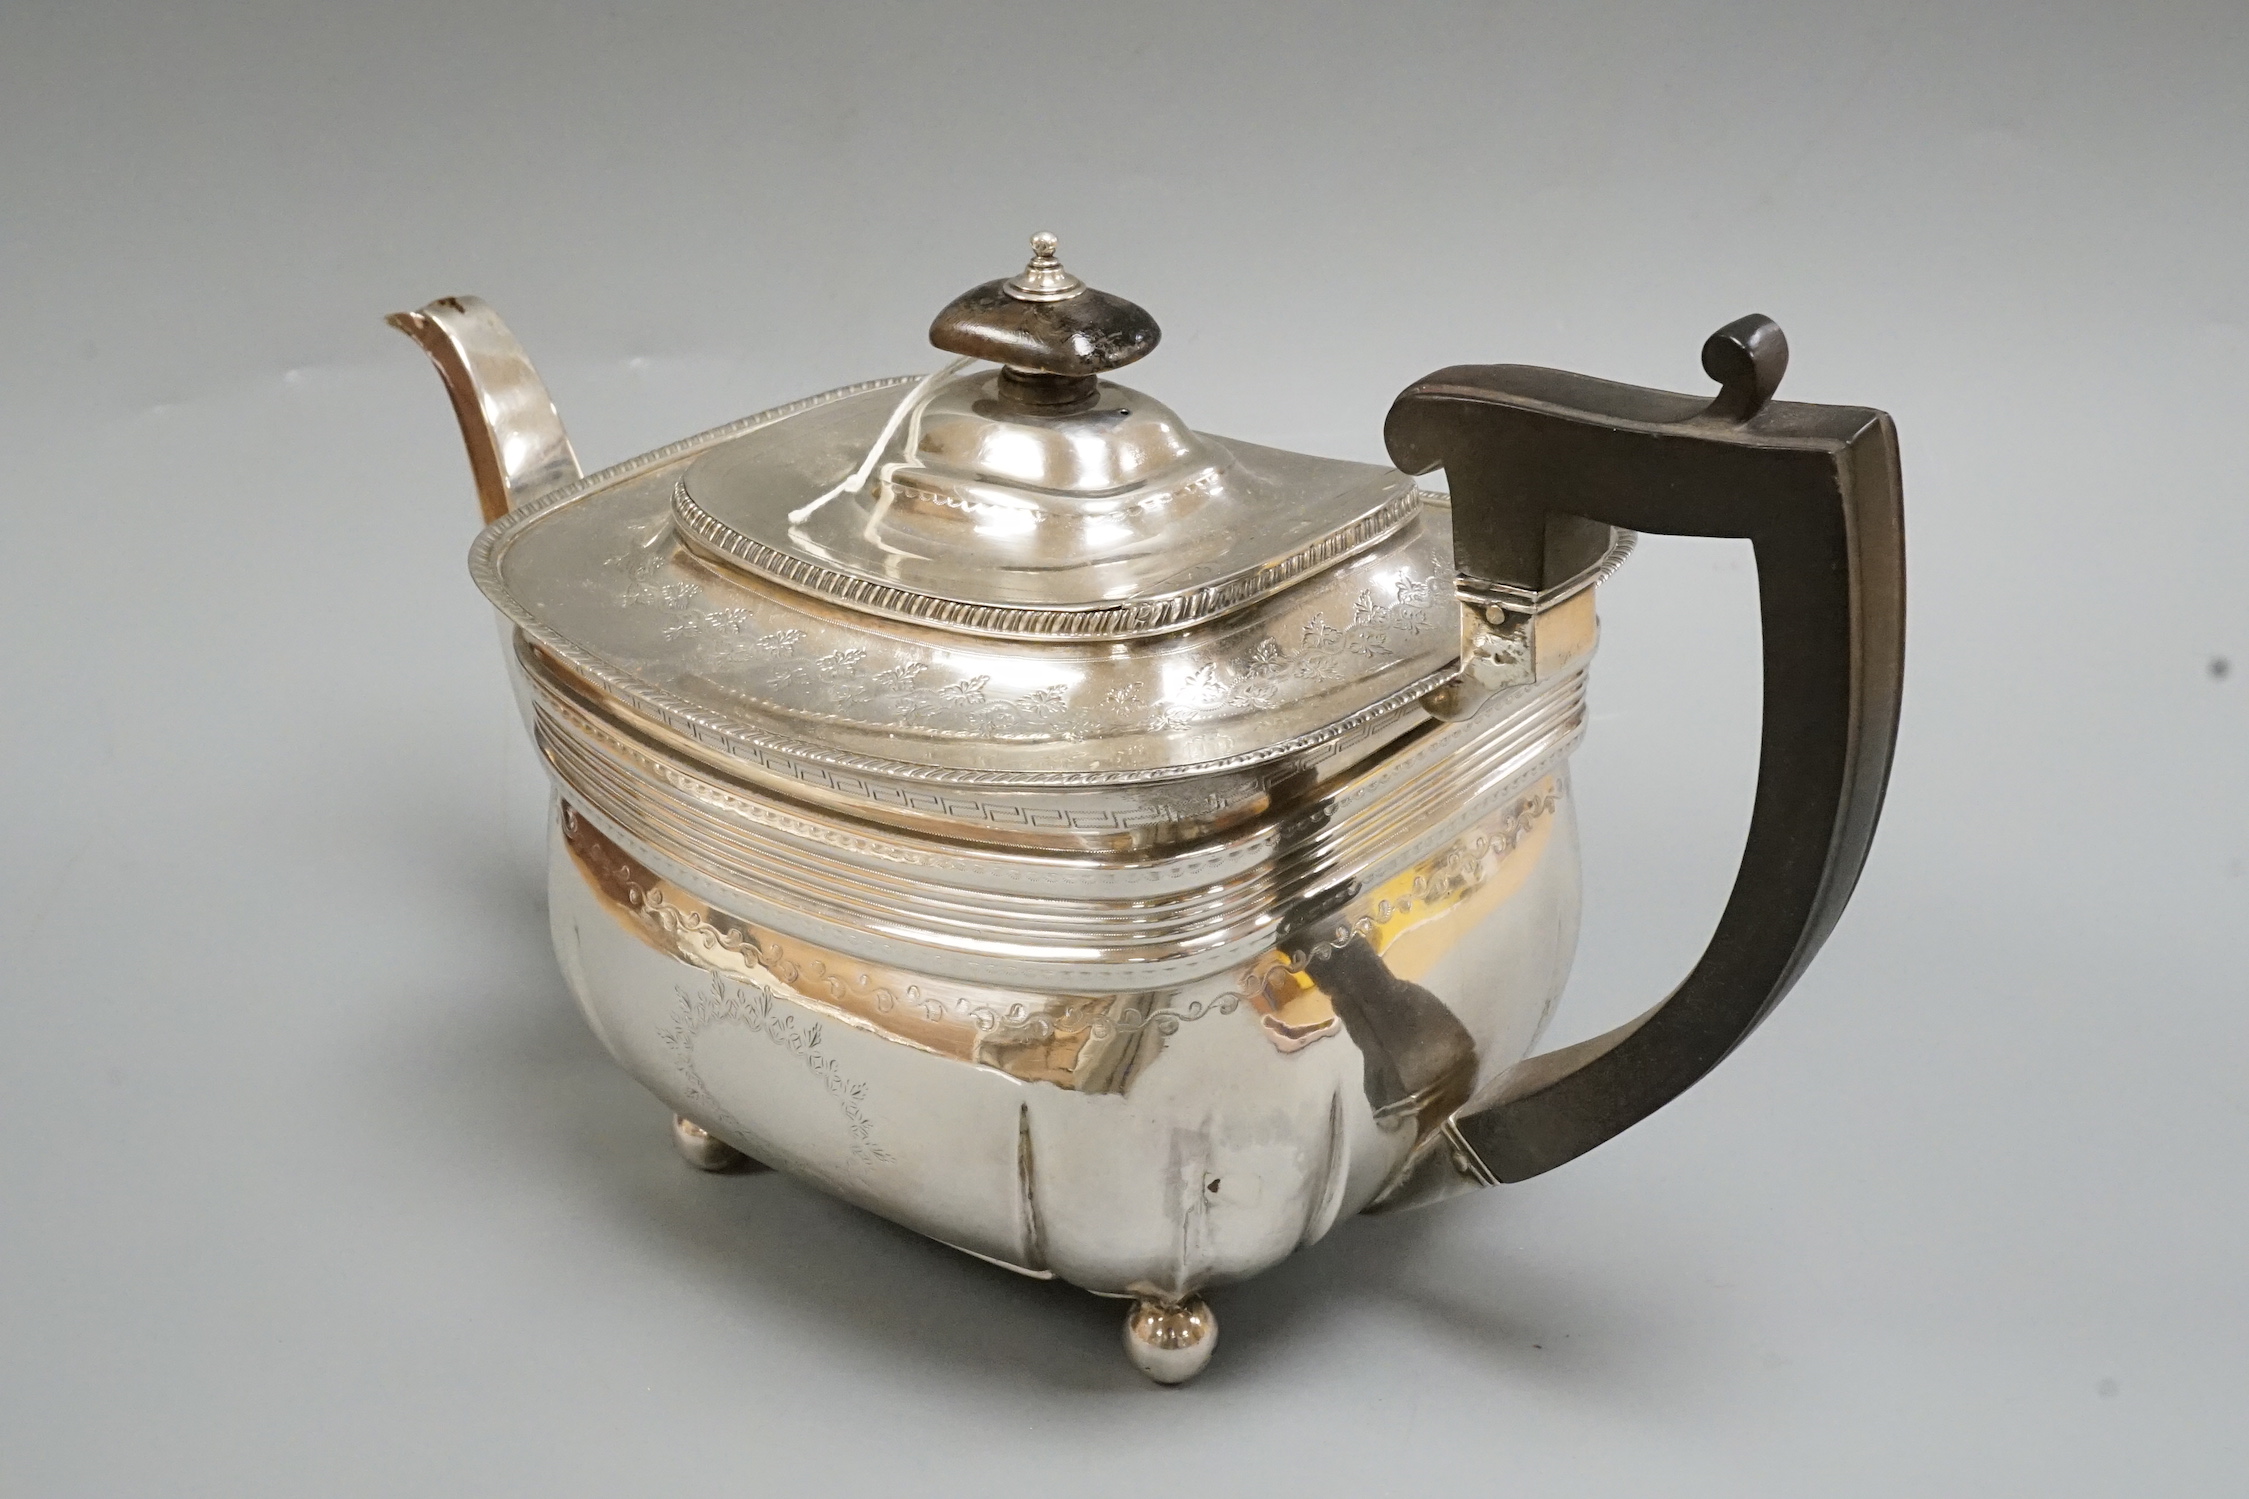 A George III chased silver teapot, by Peter & William Bateman, London, 1811, gross weight 20.1oz.